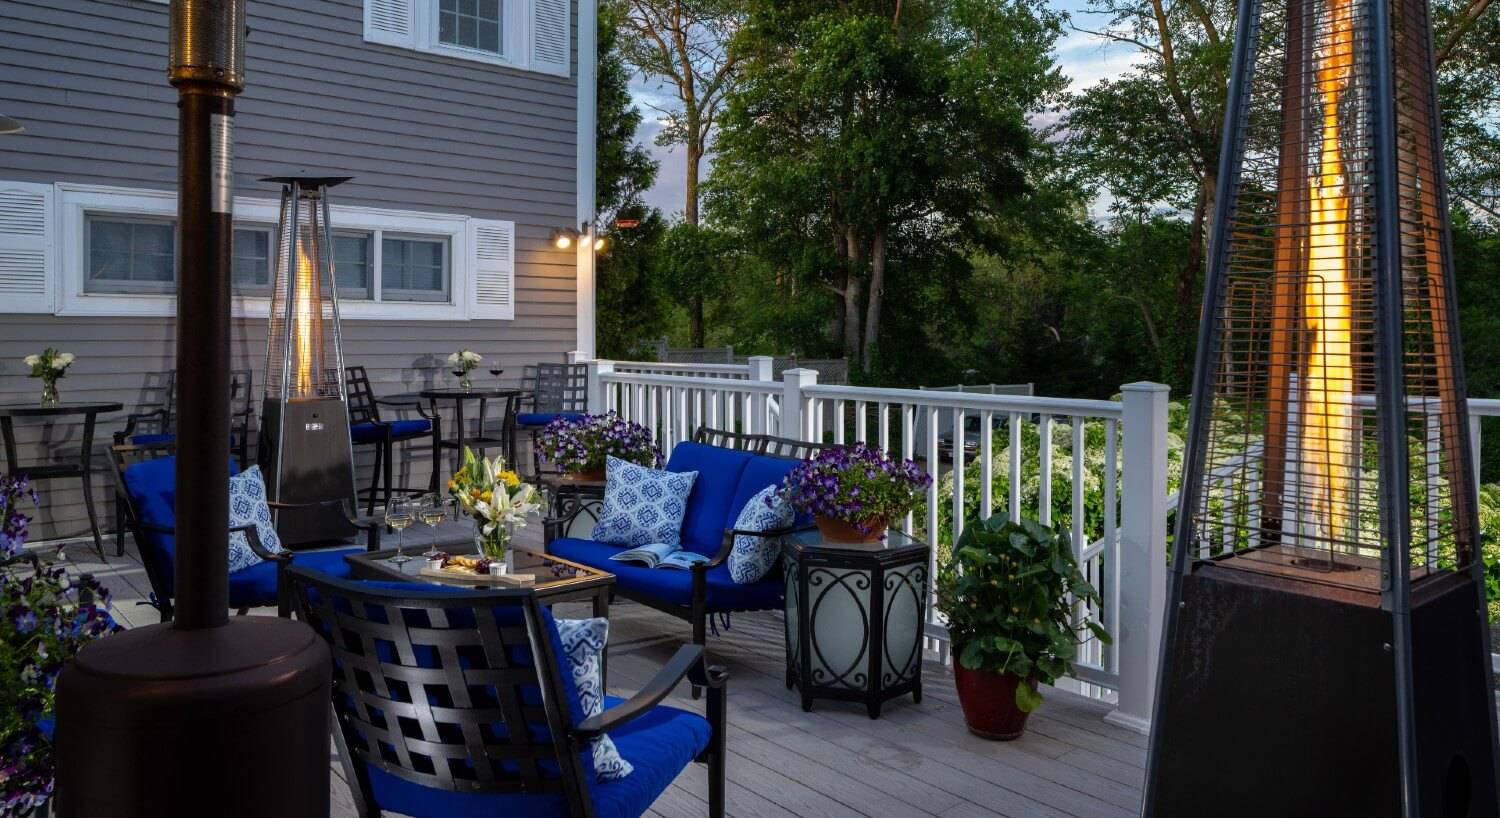 Outdoor deck at dusk with patio furniture, potted flowers and tall fire lamps